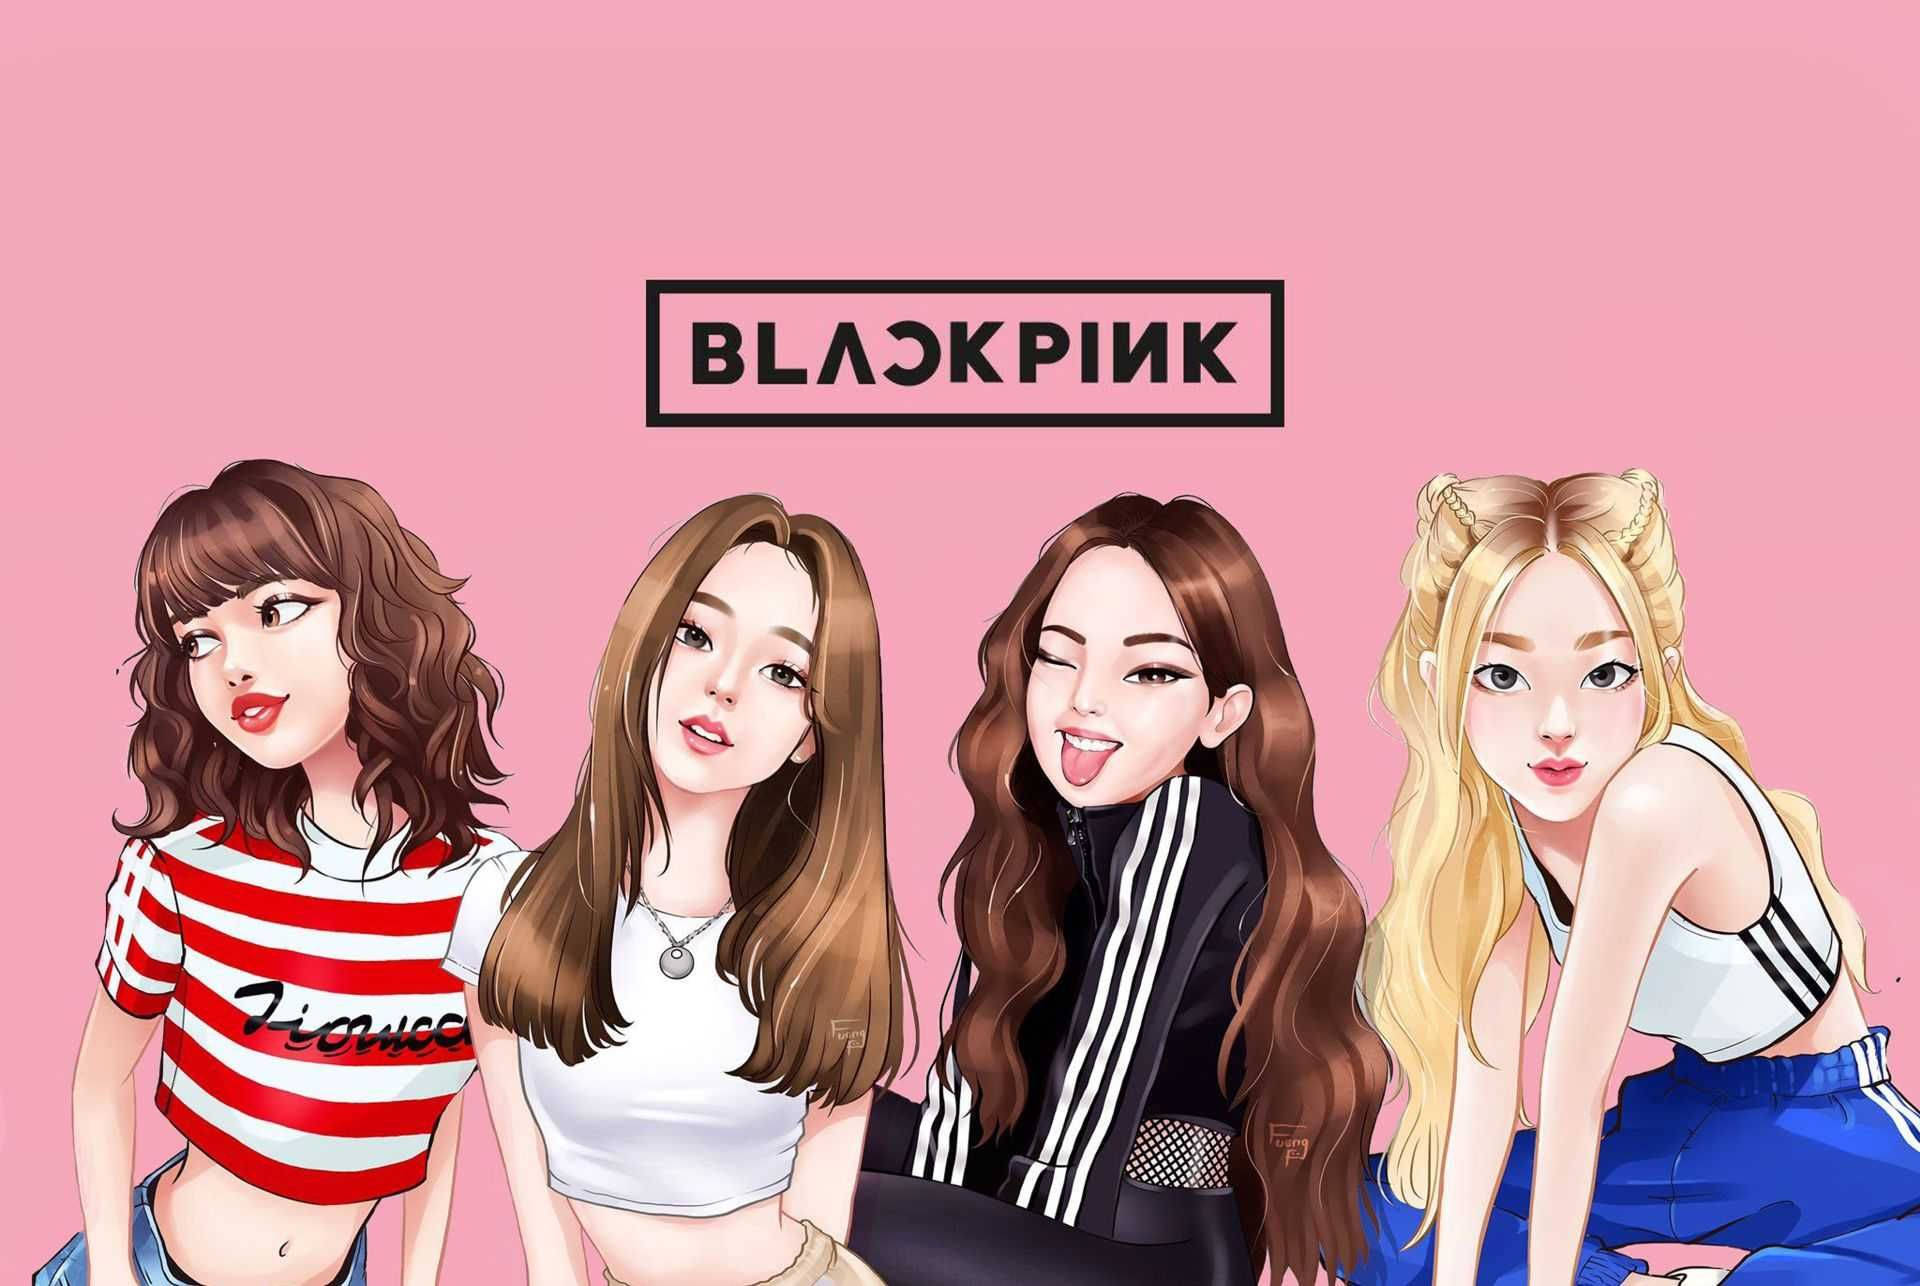 Blackpink Logo With Animated Members Wallpaper